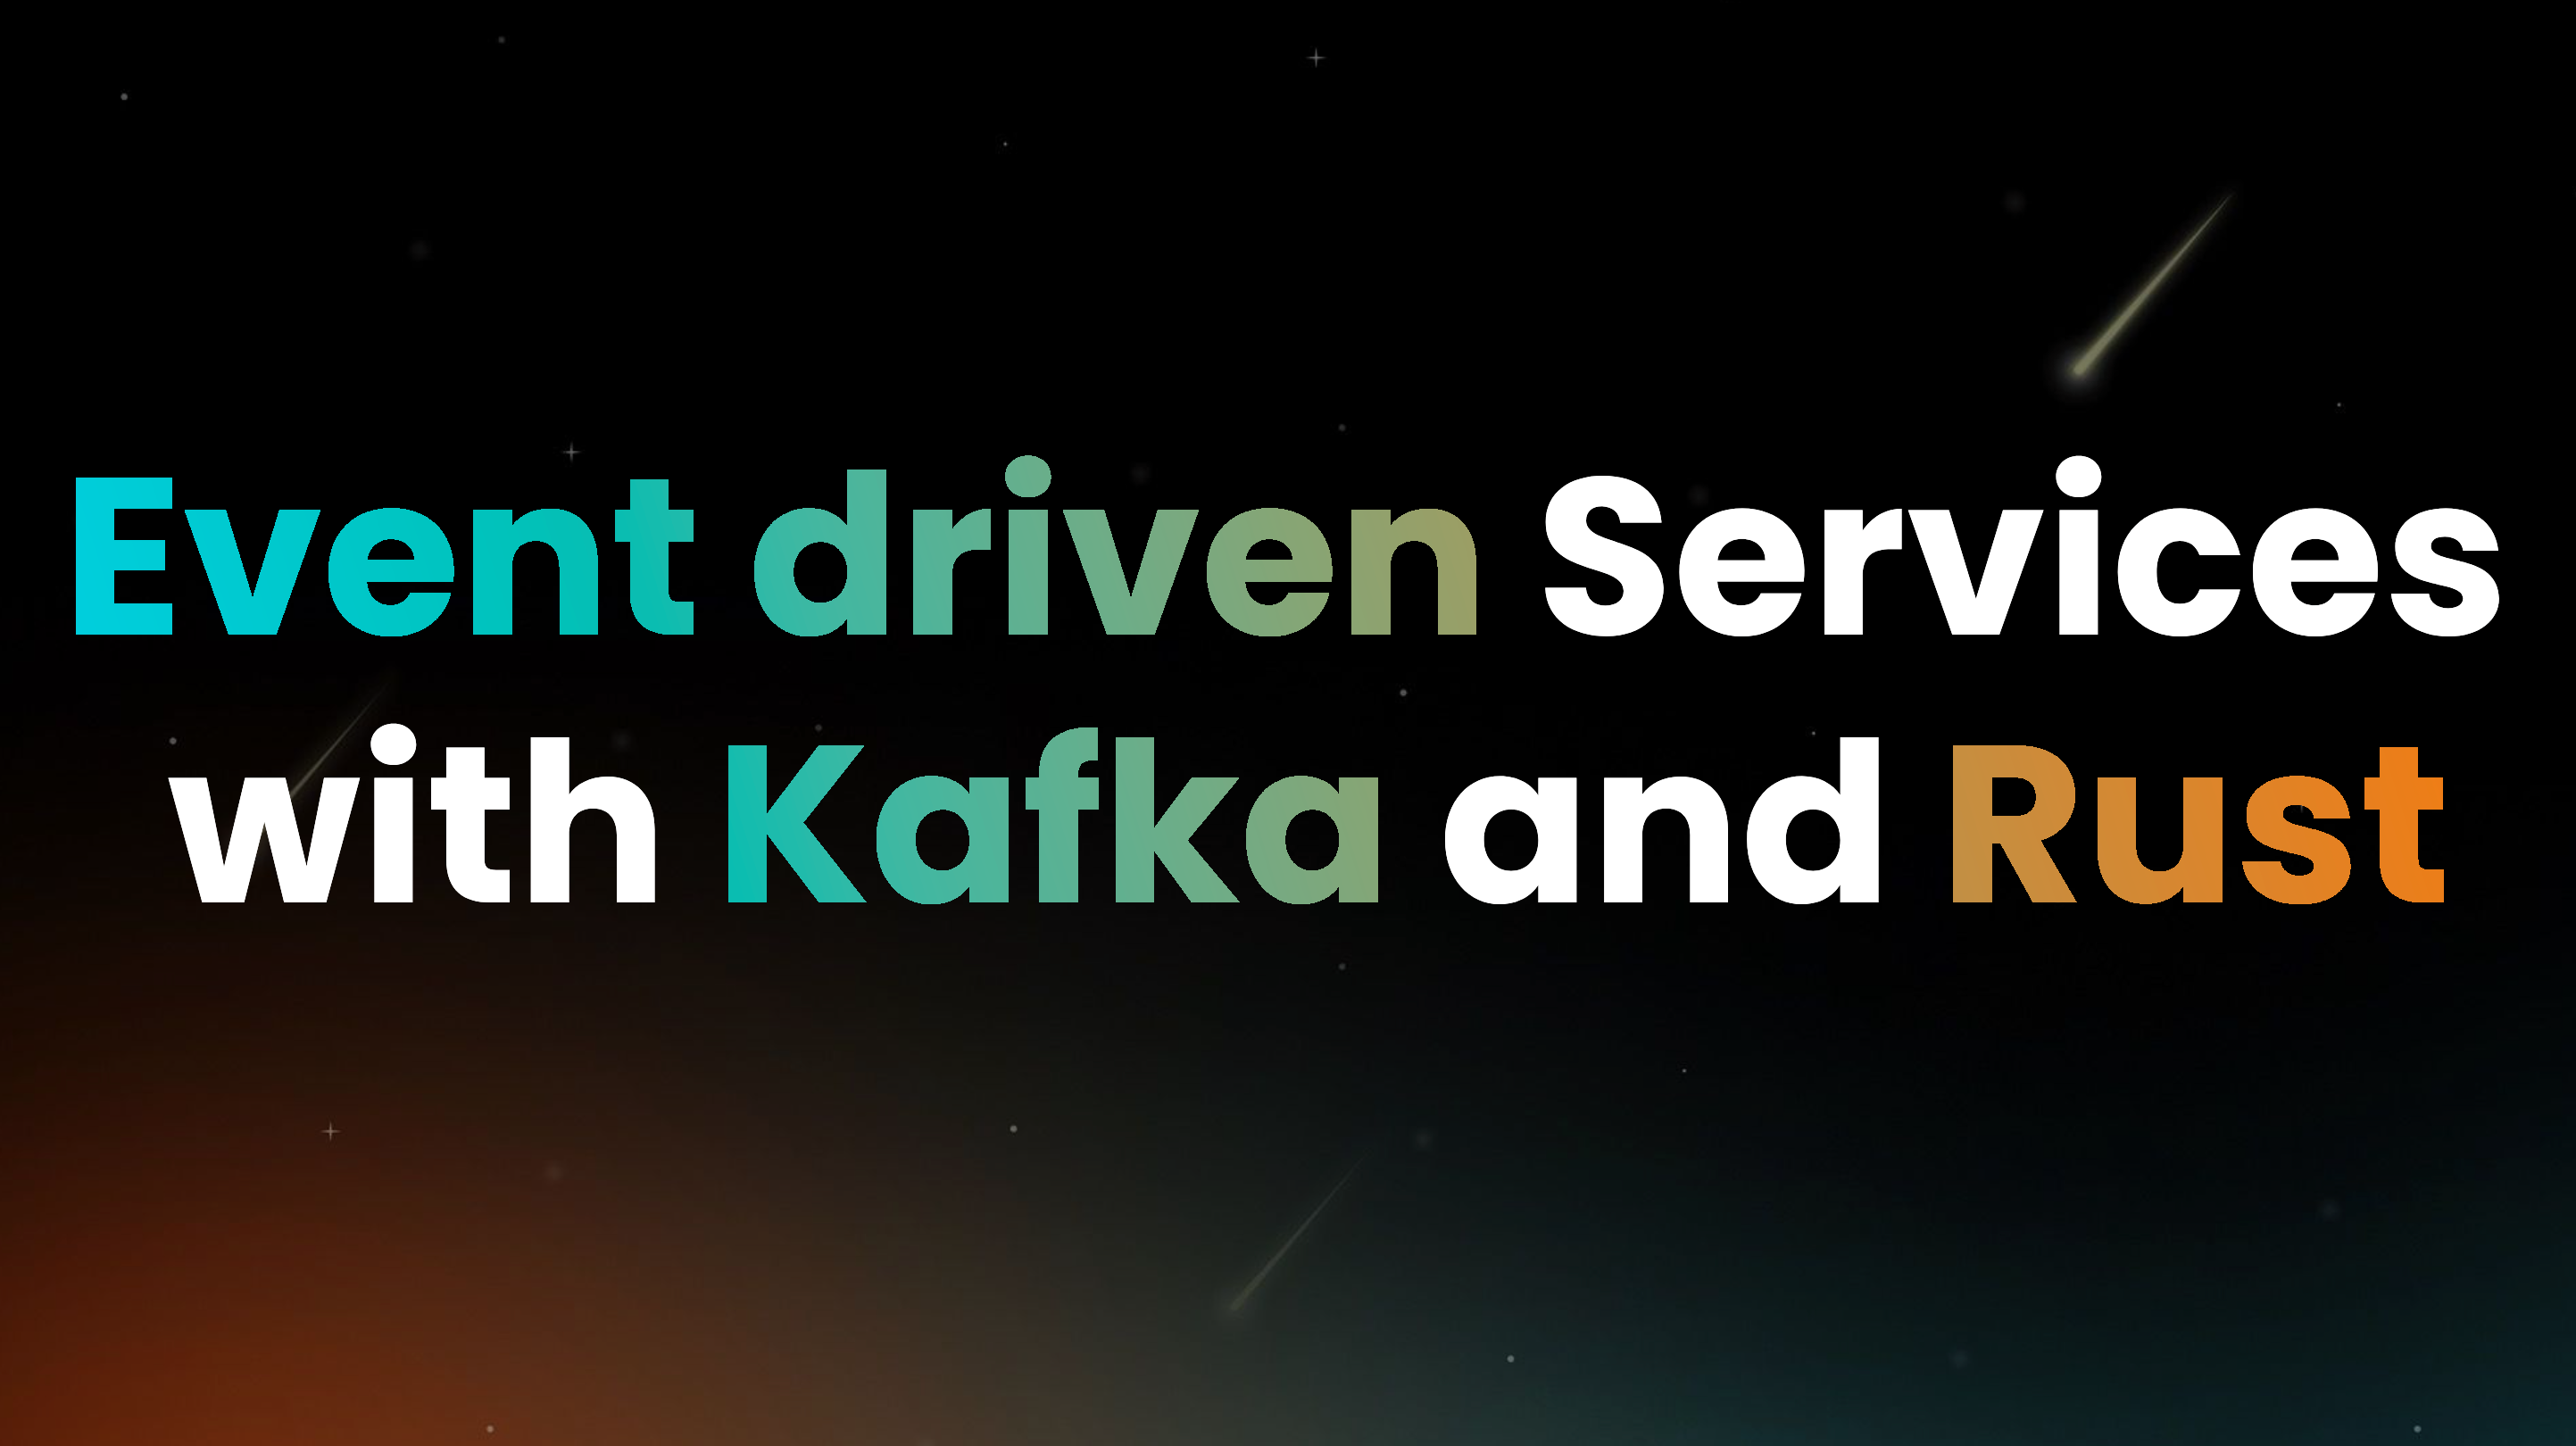 Event driven Microservices using Kafka and Rust